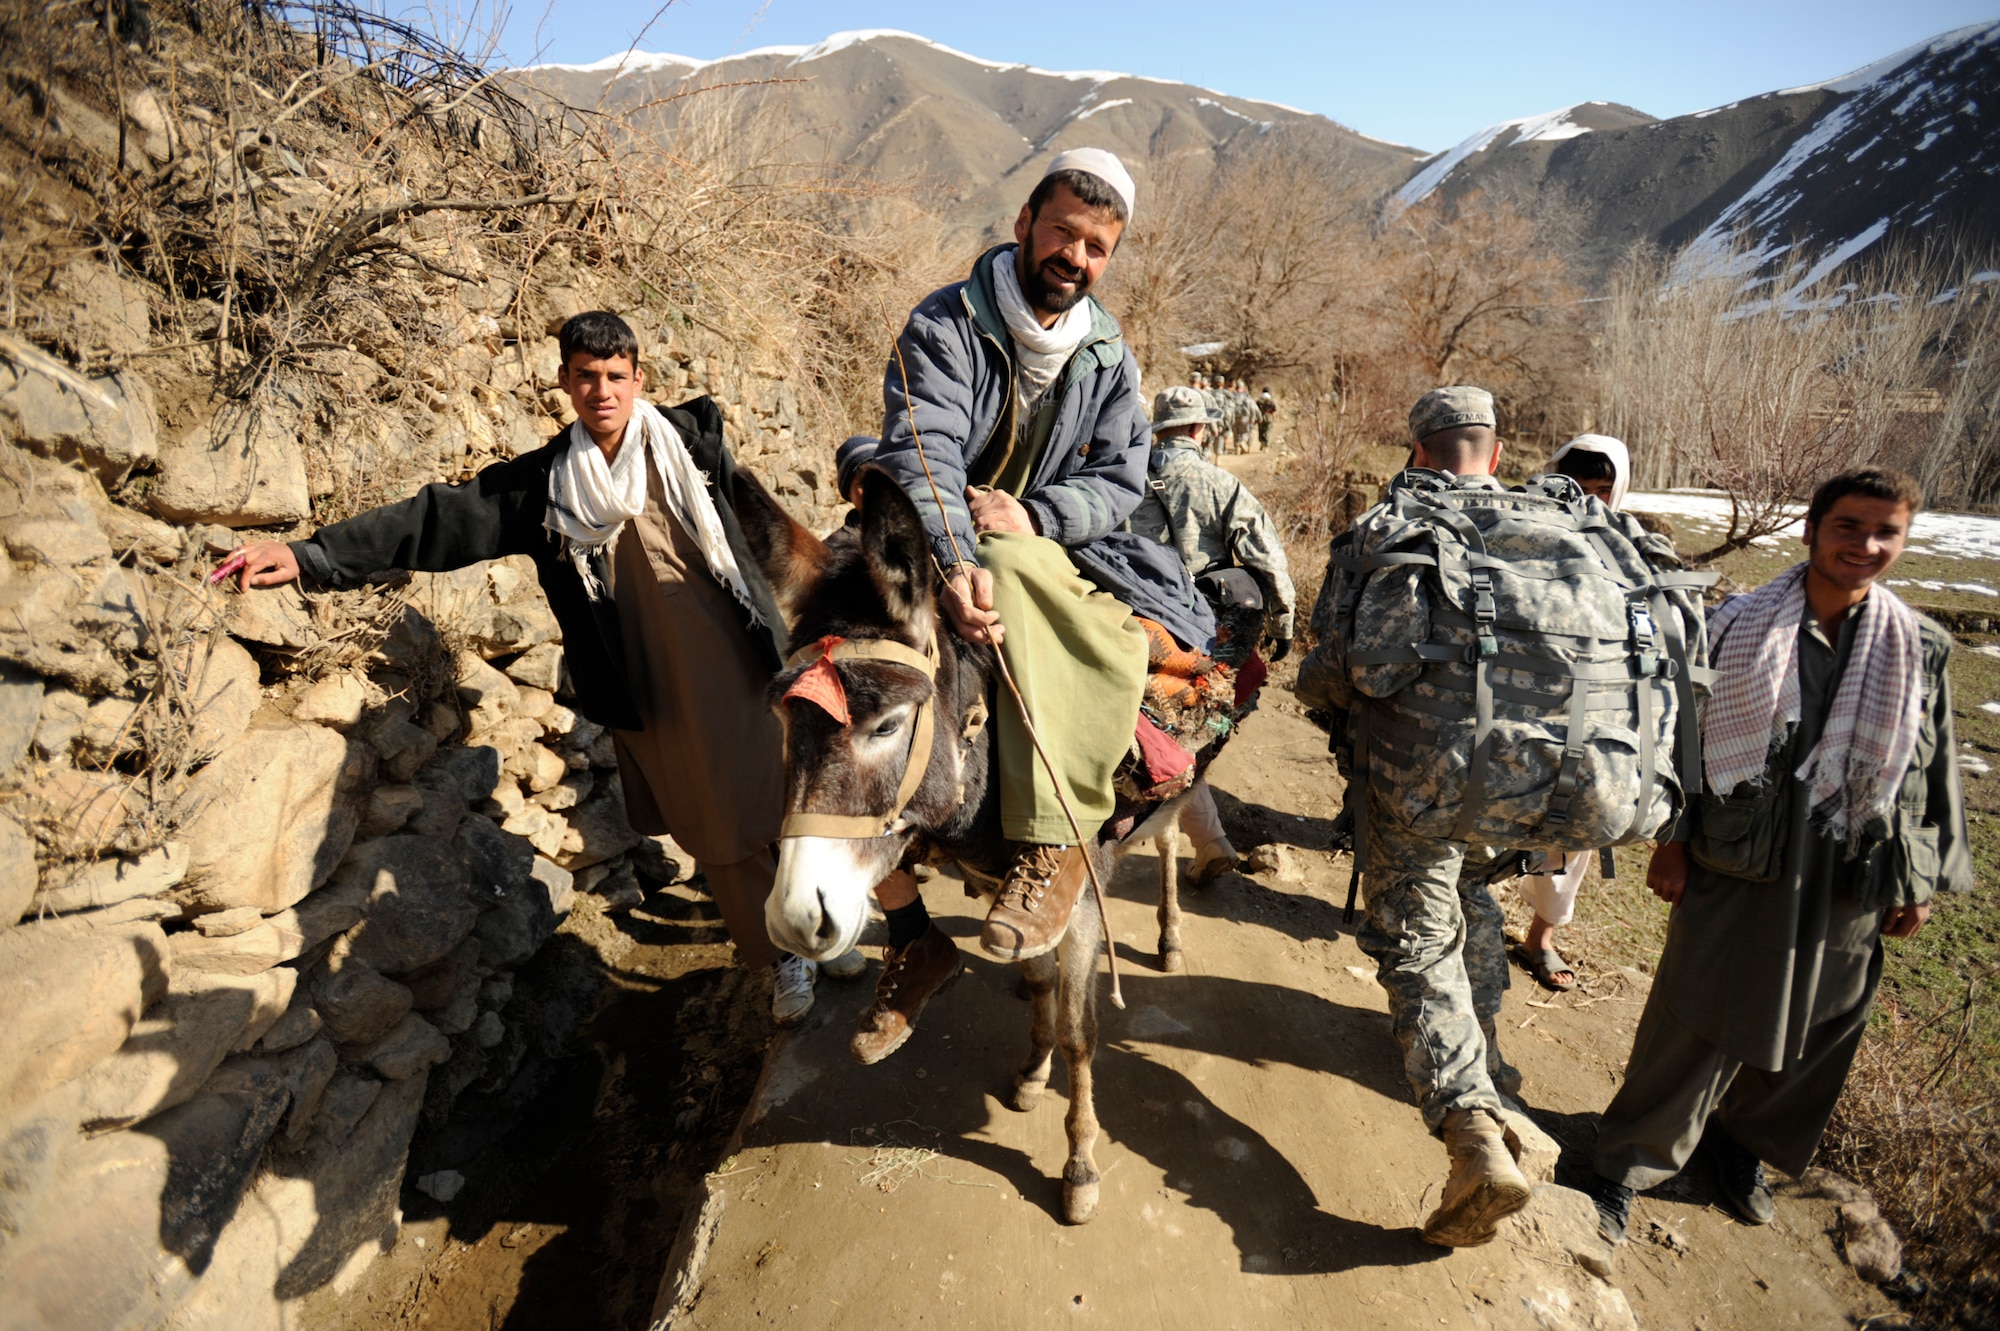 U.S. Army Sgt. Ramon Guzman, Panjshir Provincial Reconstruction Team (PRT) Civil Affairs, walks past villagers during a site visit in Afghanistan's Panjshir Valley Mar. 5, 2009, in support of Operation Enduring Freedom. (U.S. Air Force photo by Staff Sgt. James L. Harper Jr.)